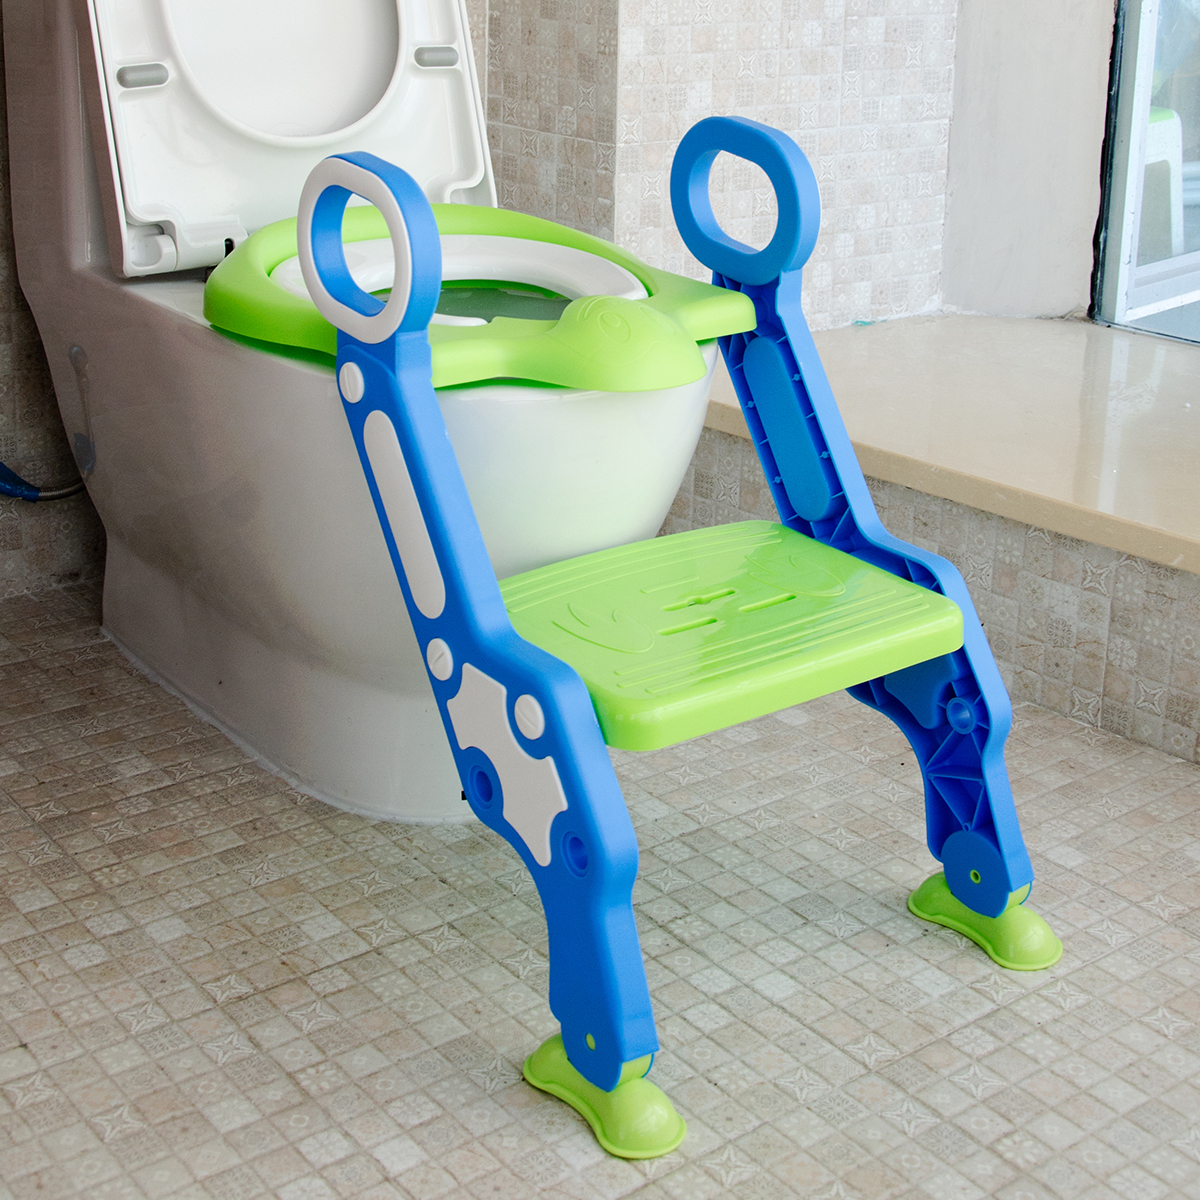 Baby Potty Training Seat With Ladder - Buy Product on Meetbaby